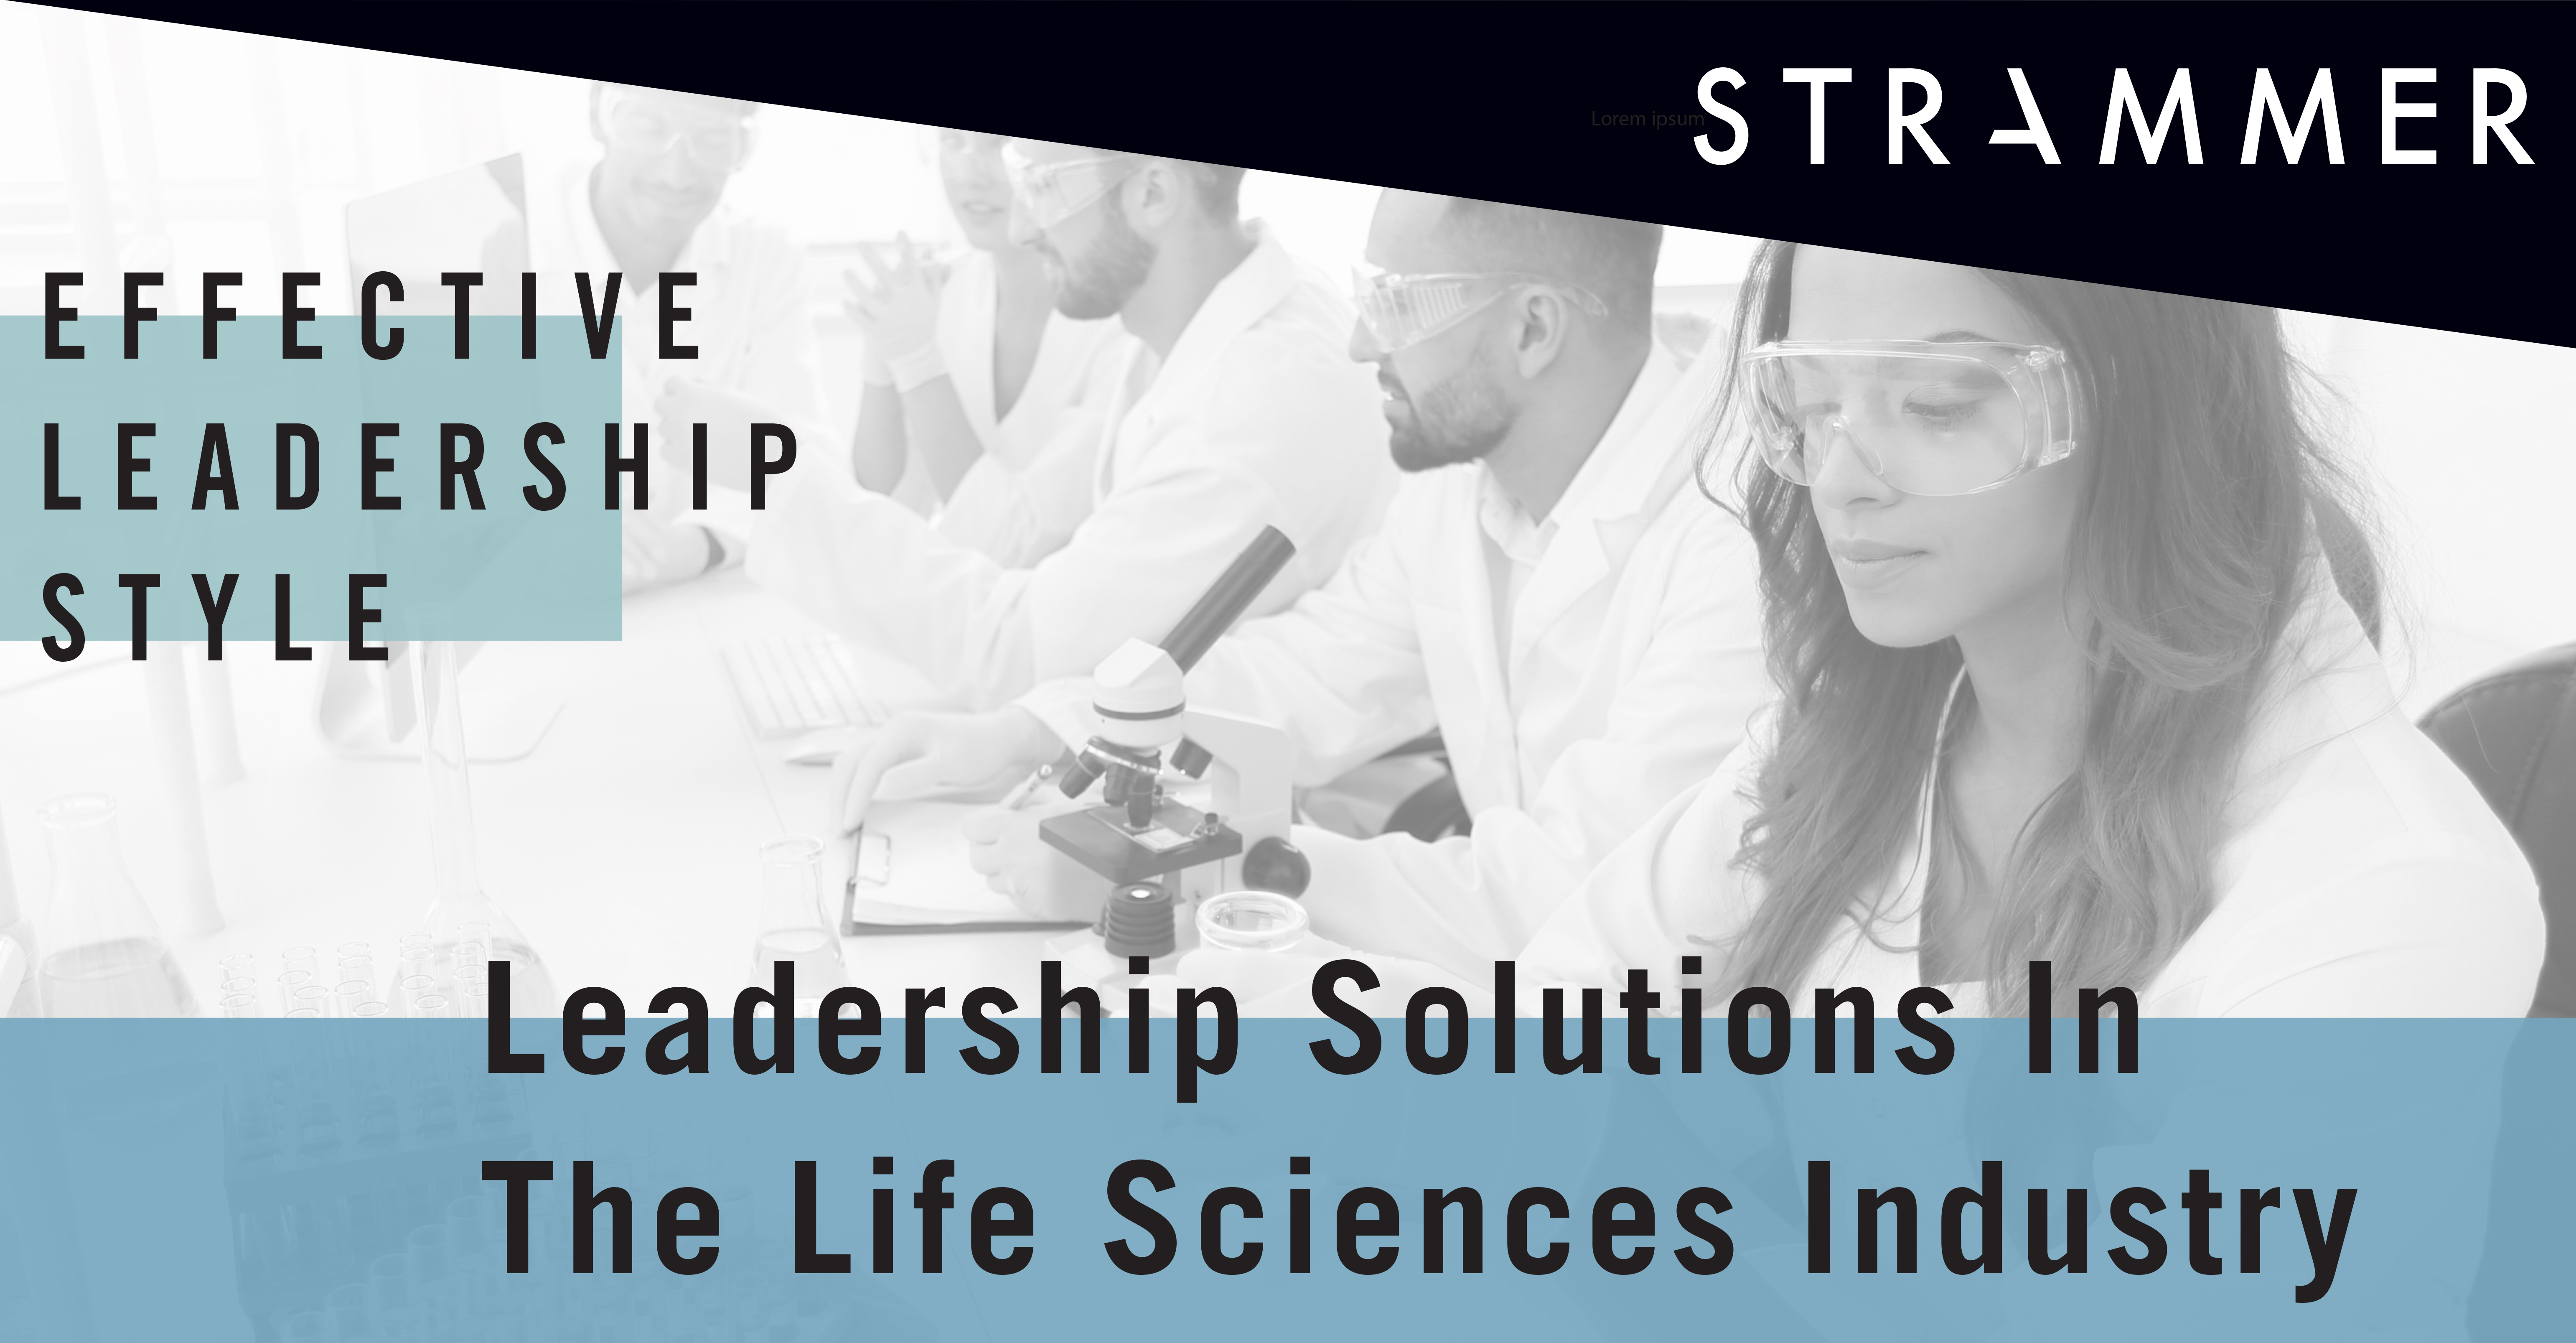 Leadership Solutions in the Life Sciences Industry